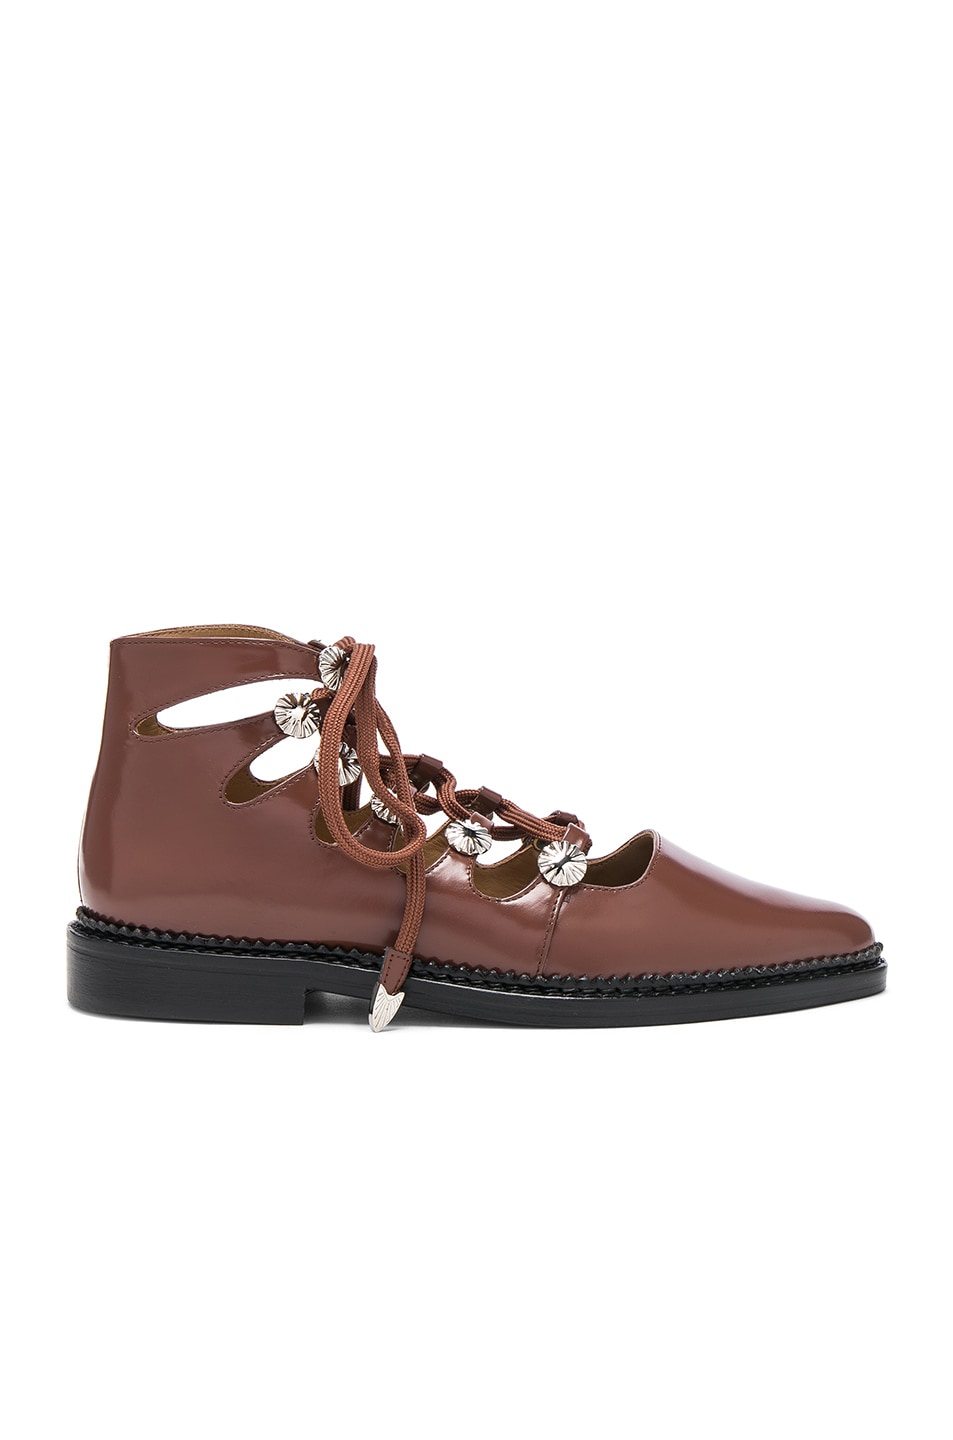 Image 1 of TOGA PULLA Lace Up Leather Boots in Brown Polido